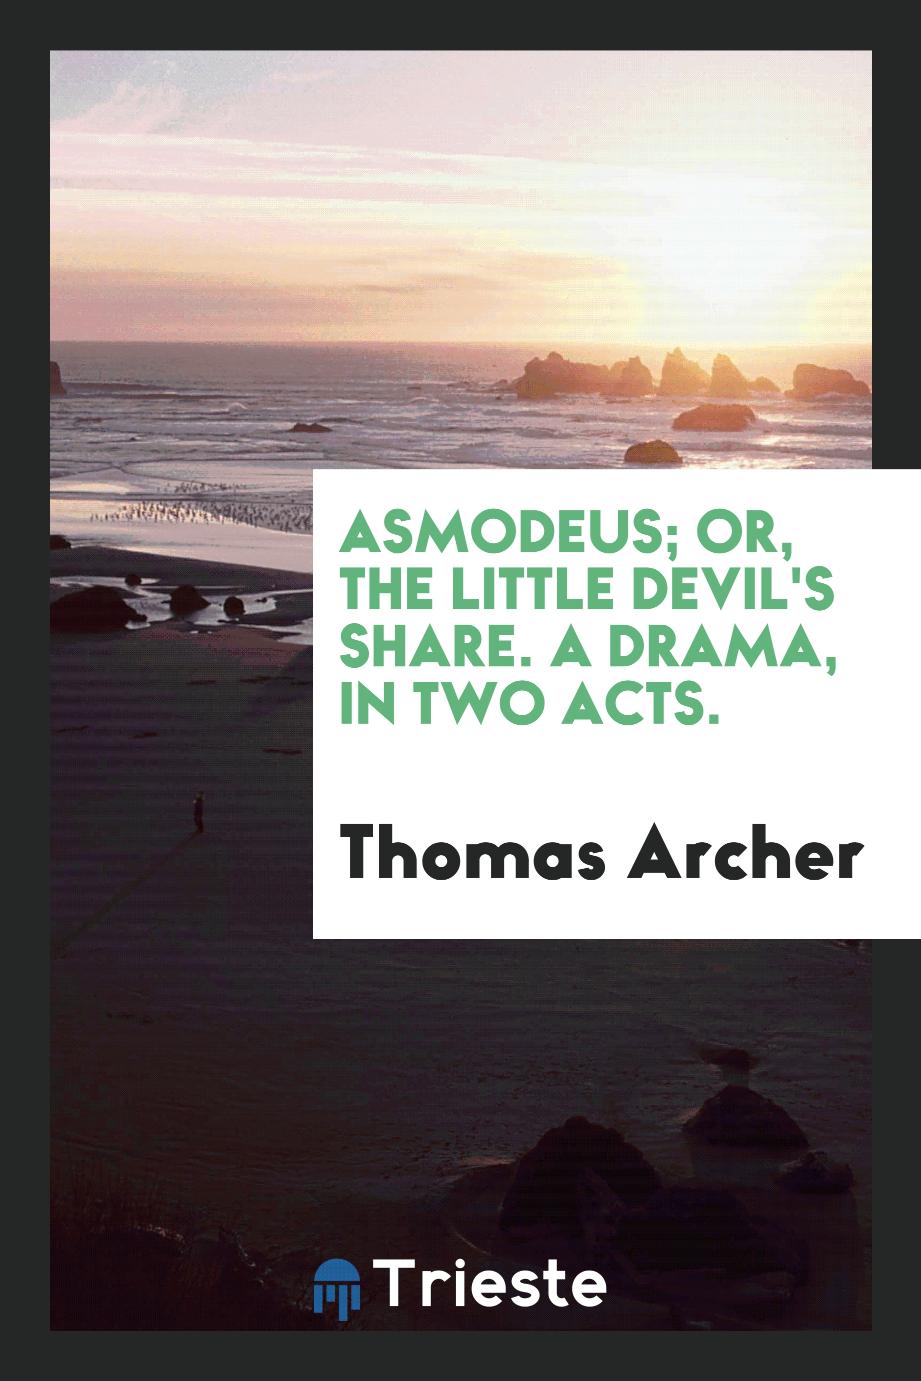 Thomas Archer - Asmodeus; or, The little devil's share. A drama, in two acts.